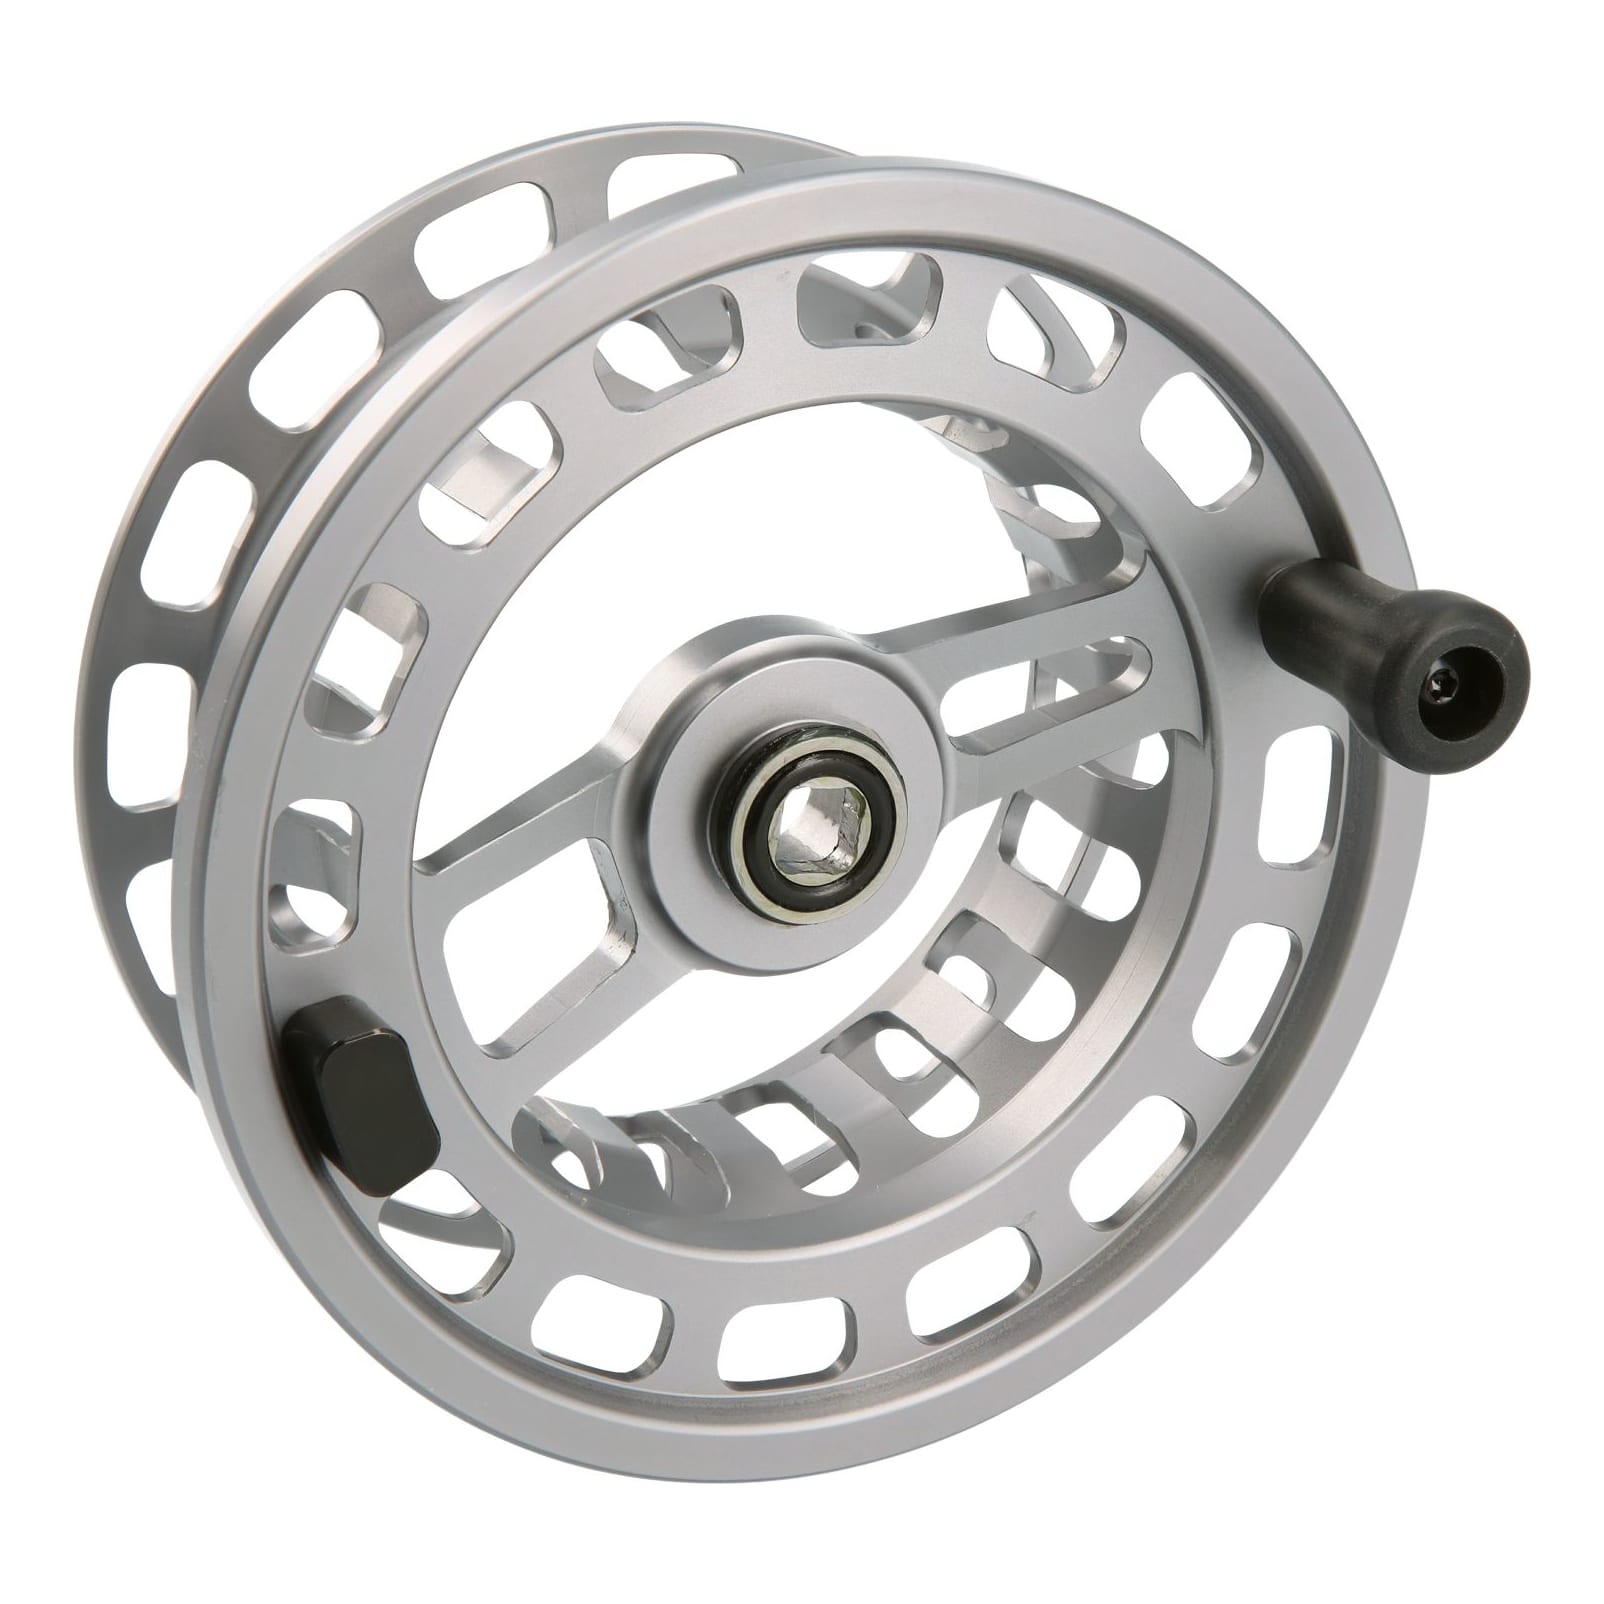 World Wide Sportsman® Gold Cup Fly Reel 